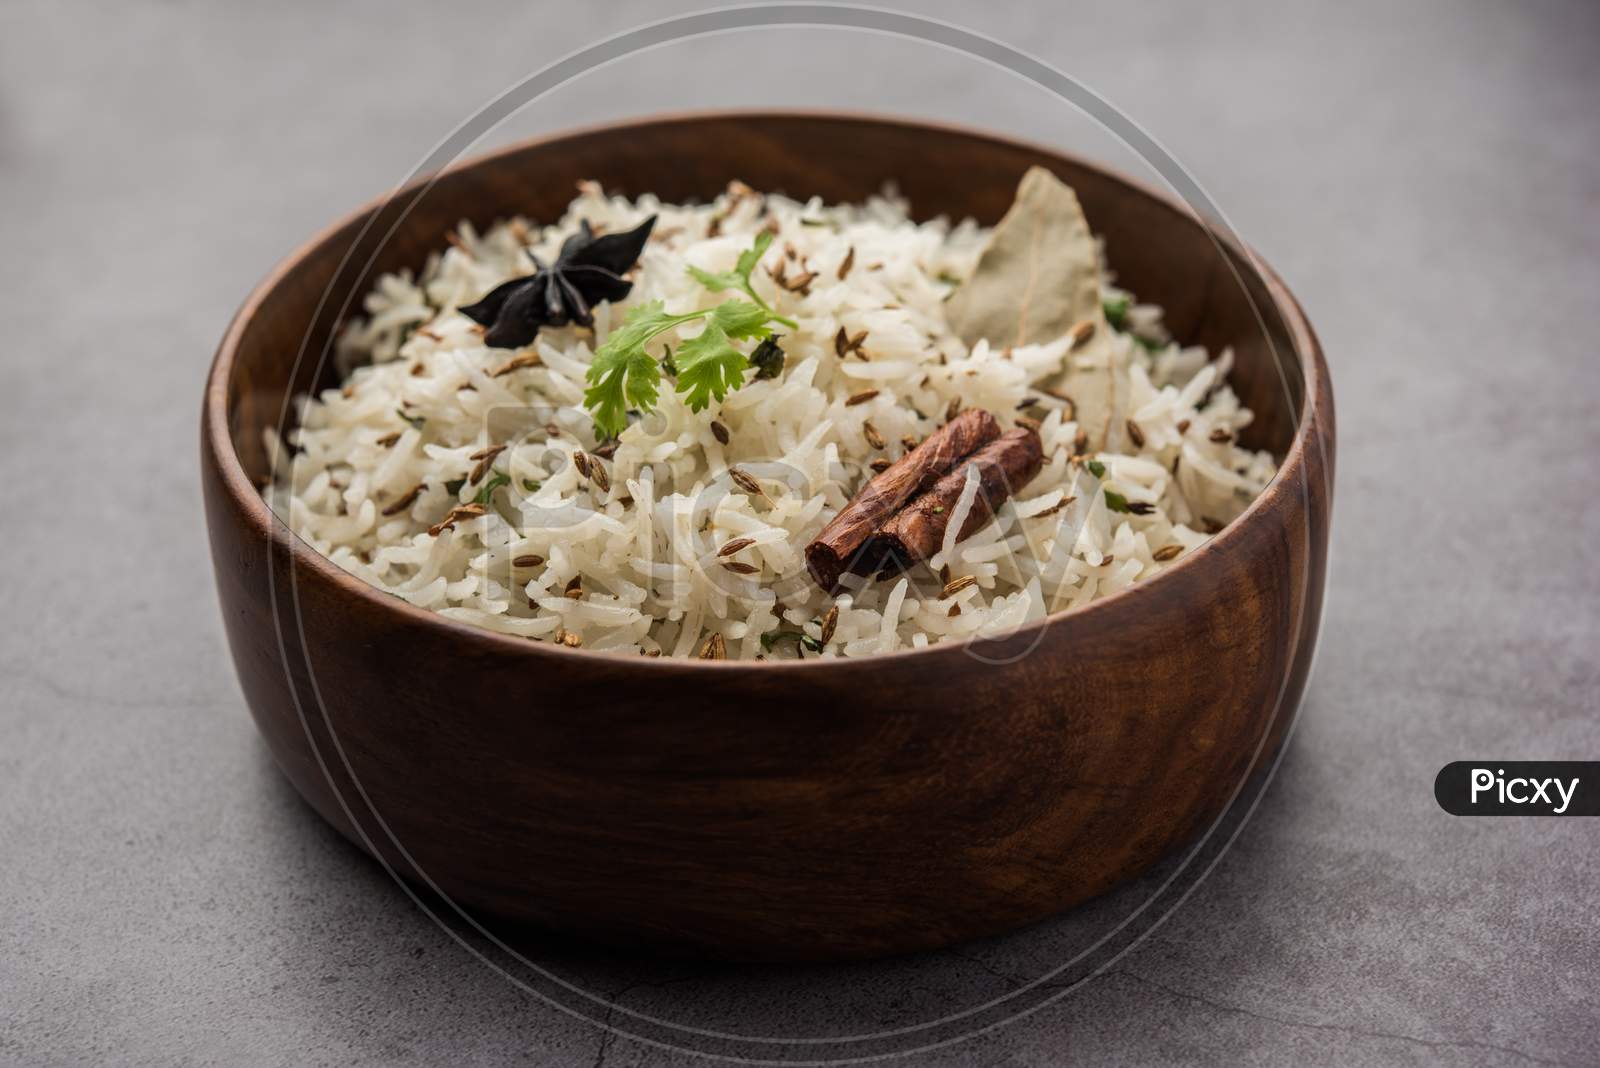 Jeera Rice - Basmati Rice Flavored With Fried Cumin Seeds And Basic Spices, Indian Food